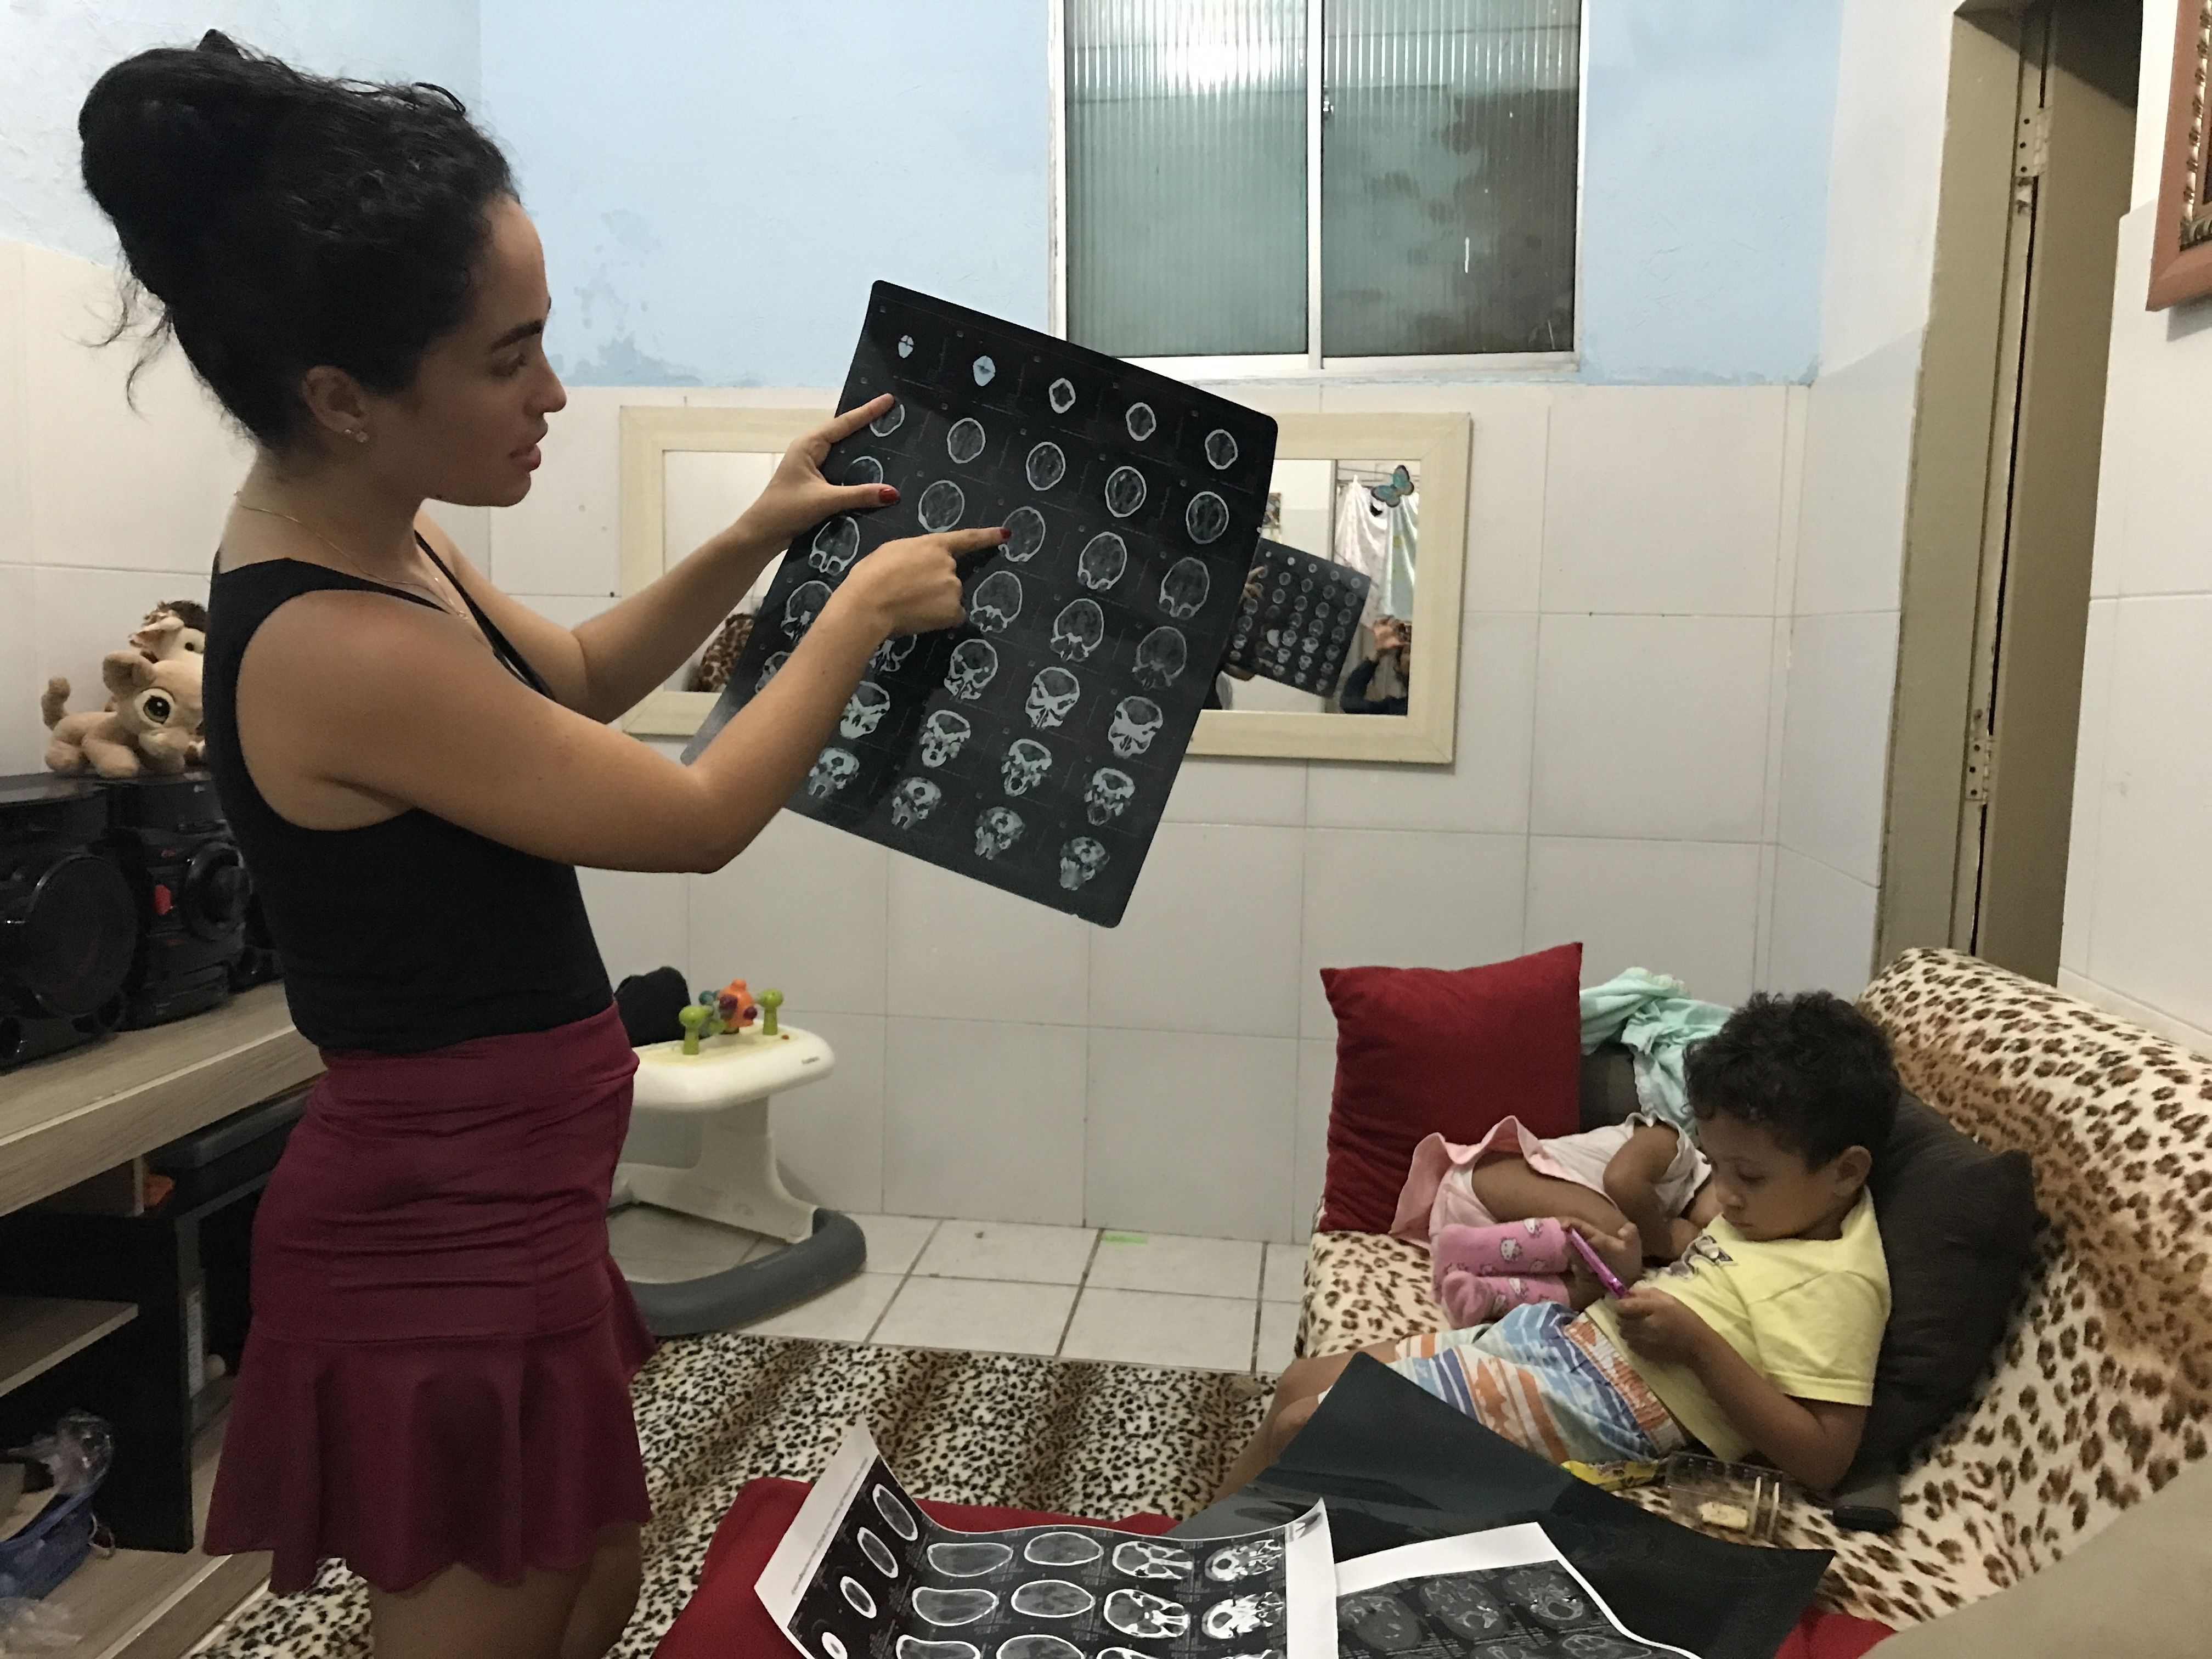 Dhulha Alen Silva do Nascimento, 25, explains a CT scan of daughter Valentina’s brain, pointing out areas of calcification and hydrocephalus. Image by Poonam Daryani. Brazil, 2017.